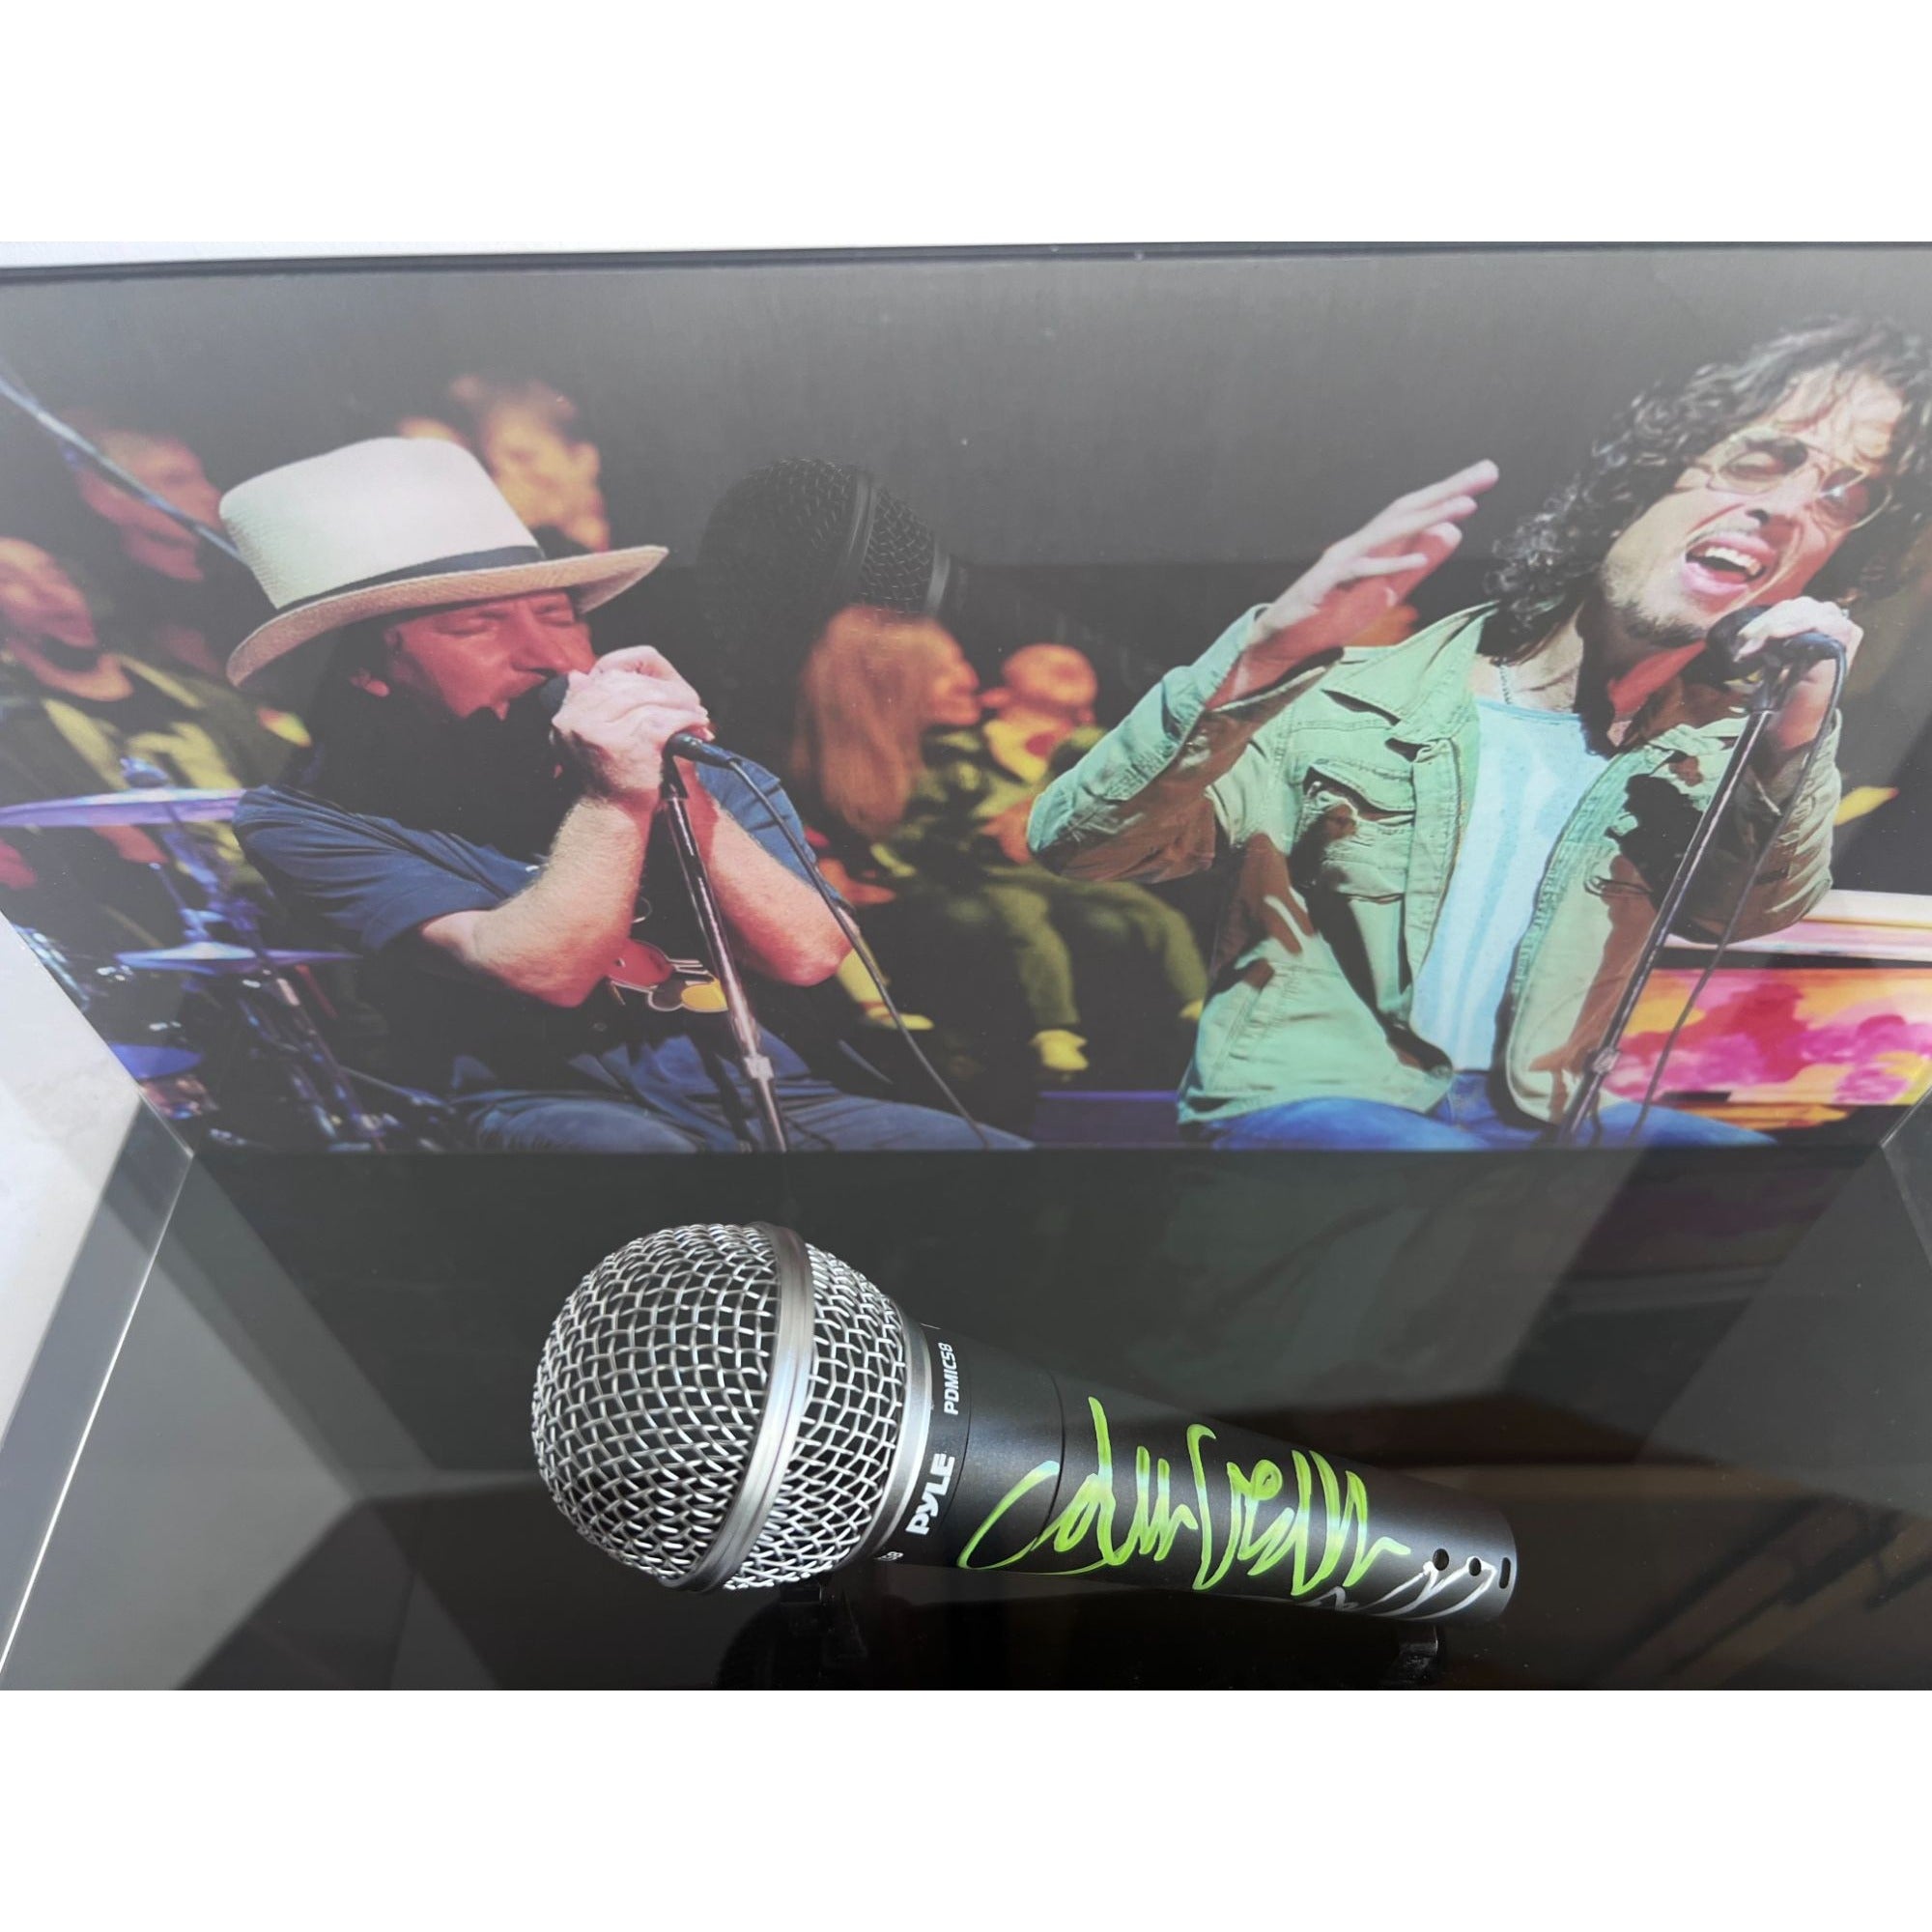 Eddie Vedder Pearl Jam Chris Cornell Soundgarden microphone signed with proof and 15x8 acrylic display case